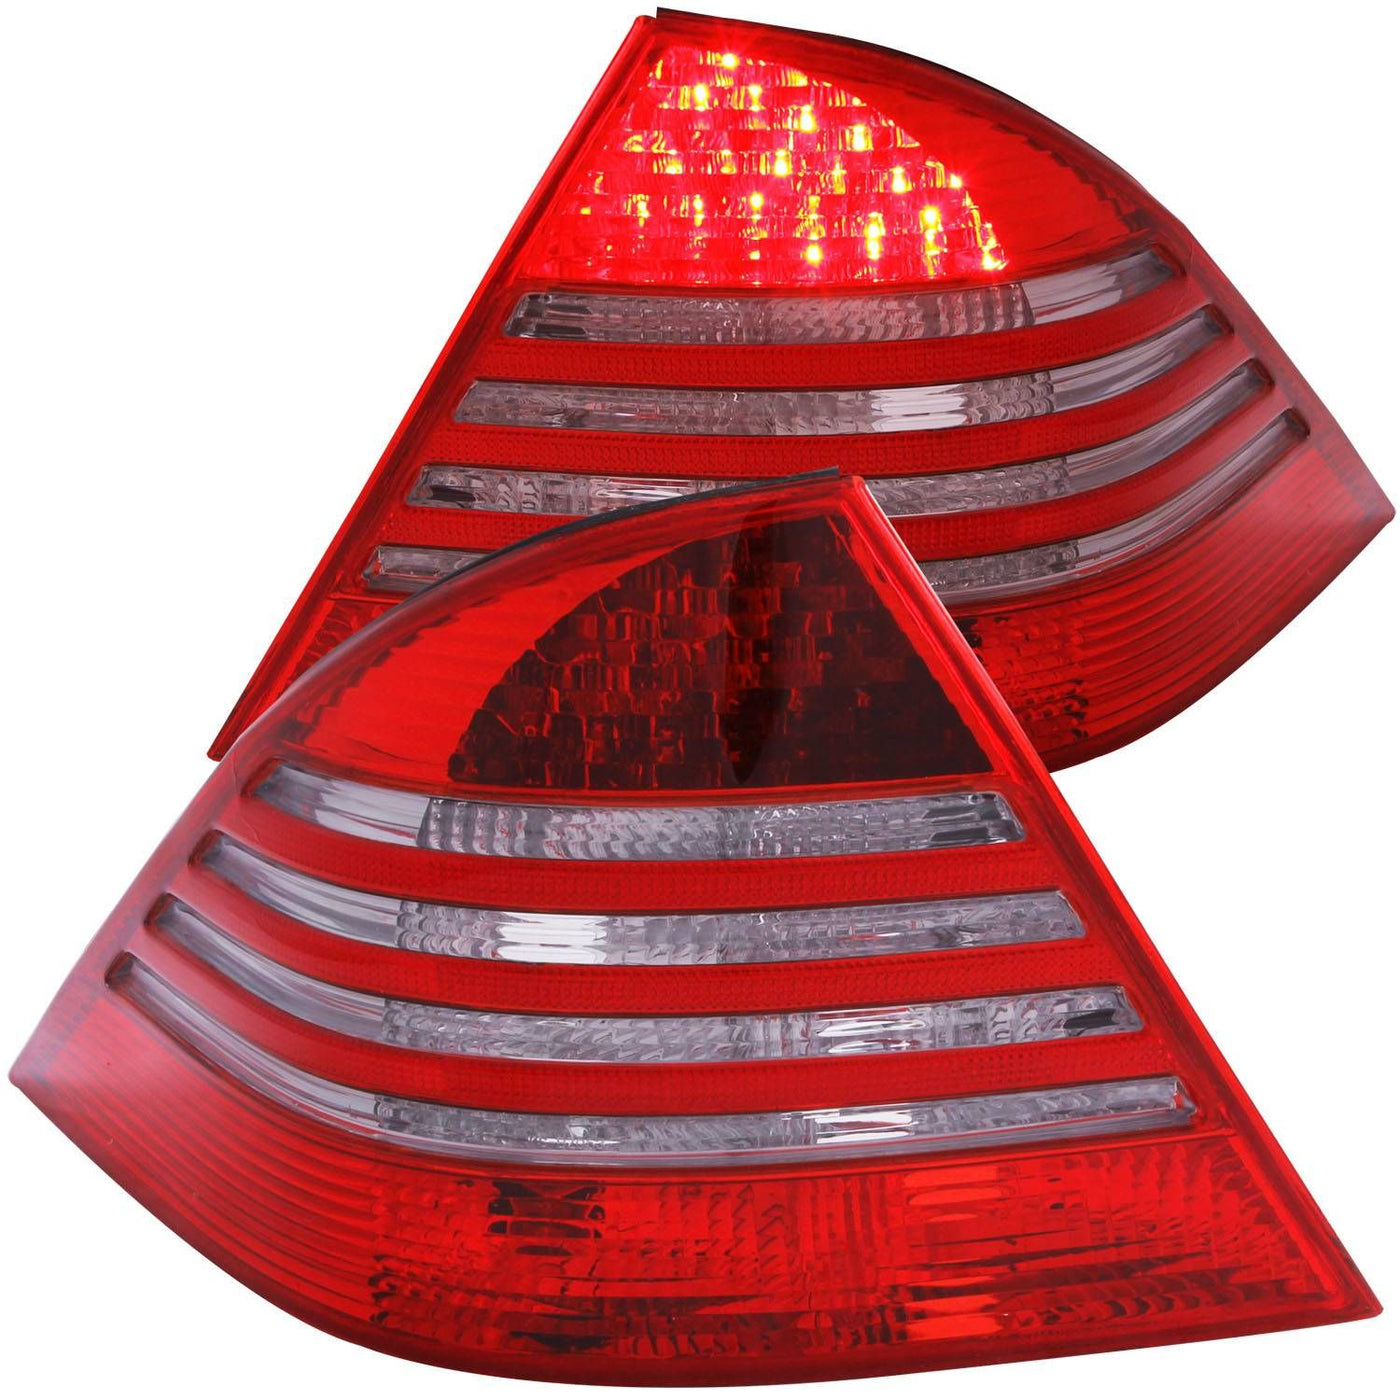 Mercedes Benz Led Tail Lights, S Class Tail Lights, S Class 00-05 Tail Lights, Red Smoke Tail Lights, Anzo Tail Lights